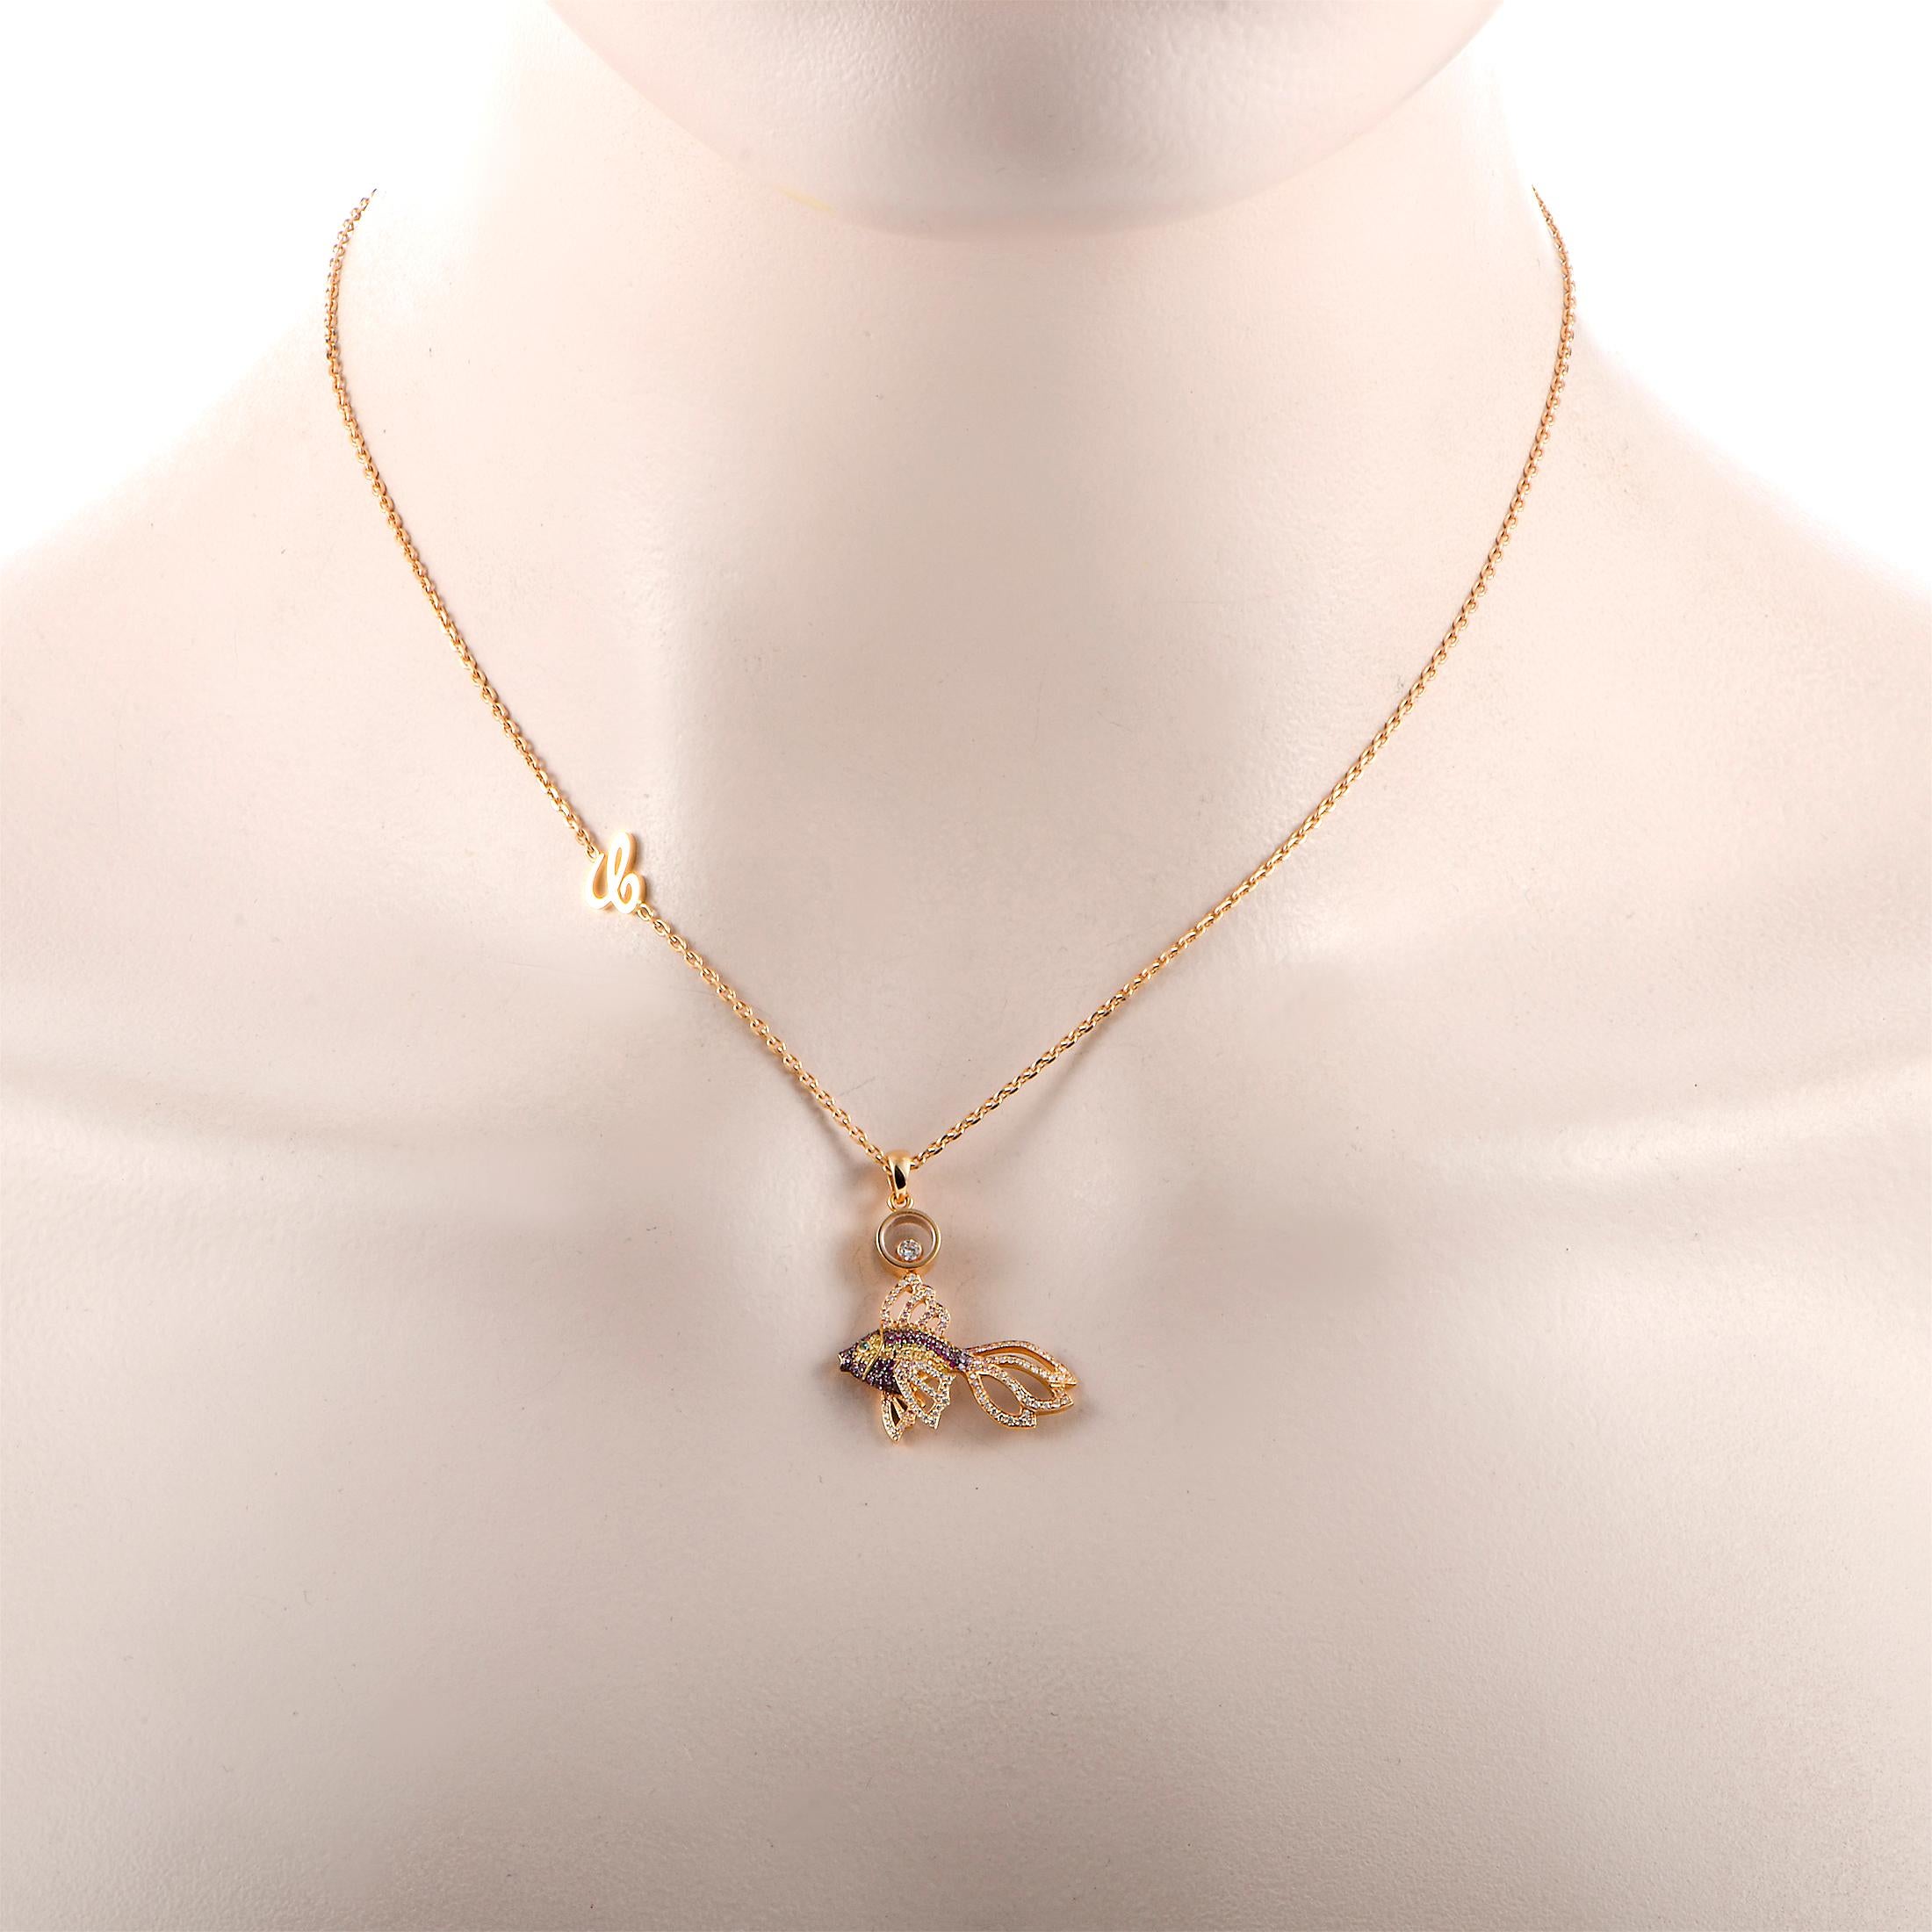 This Chopard necklace is made of 18K rose gold and presented with a 16” chain, onto which a fish pendant is attached that measures 1” in length and 1” in width. The necklace weighs 8.3 grams. It is embellished with a 0.05 ct floating white diamond,